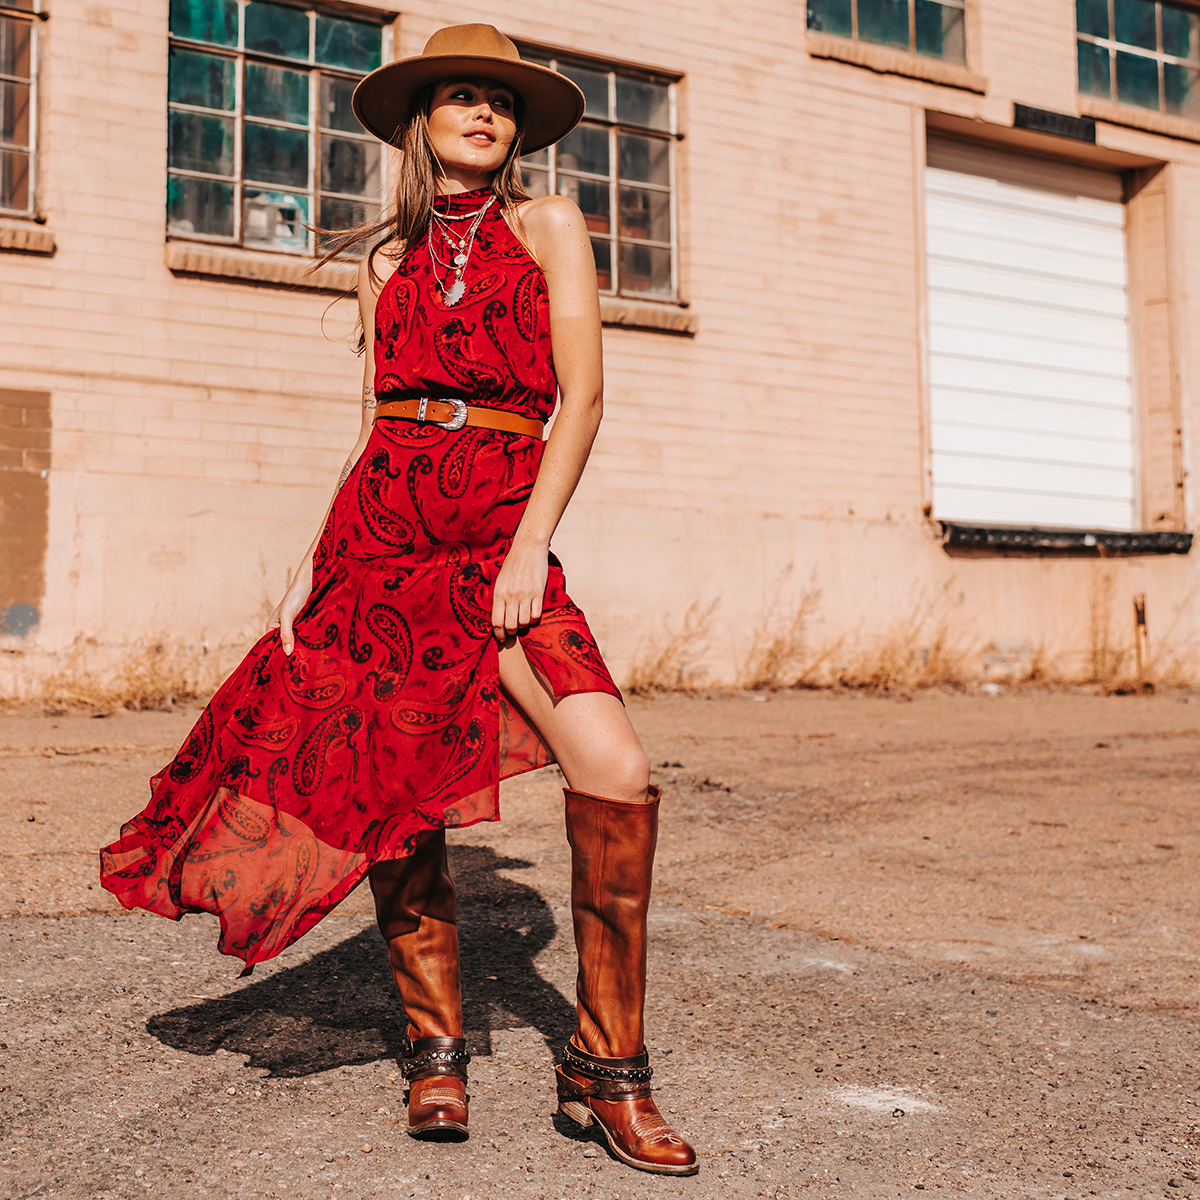 FREEBIRD women's Rodondo whiskey boot featuring a a relaxed silhouette, low heel, and mixed metal buckles lifestyle image